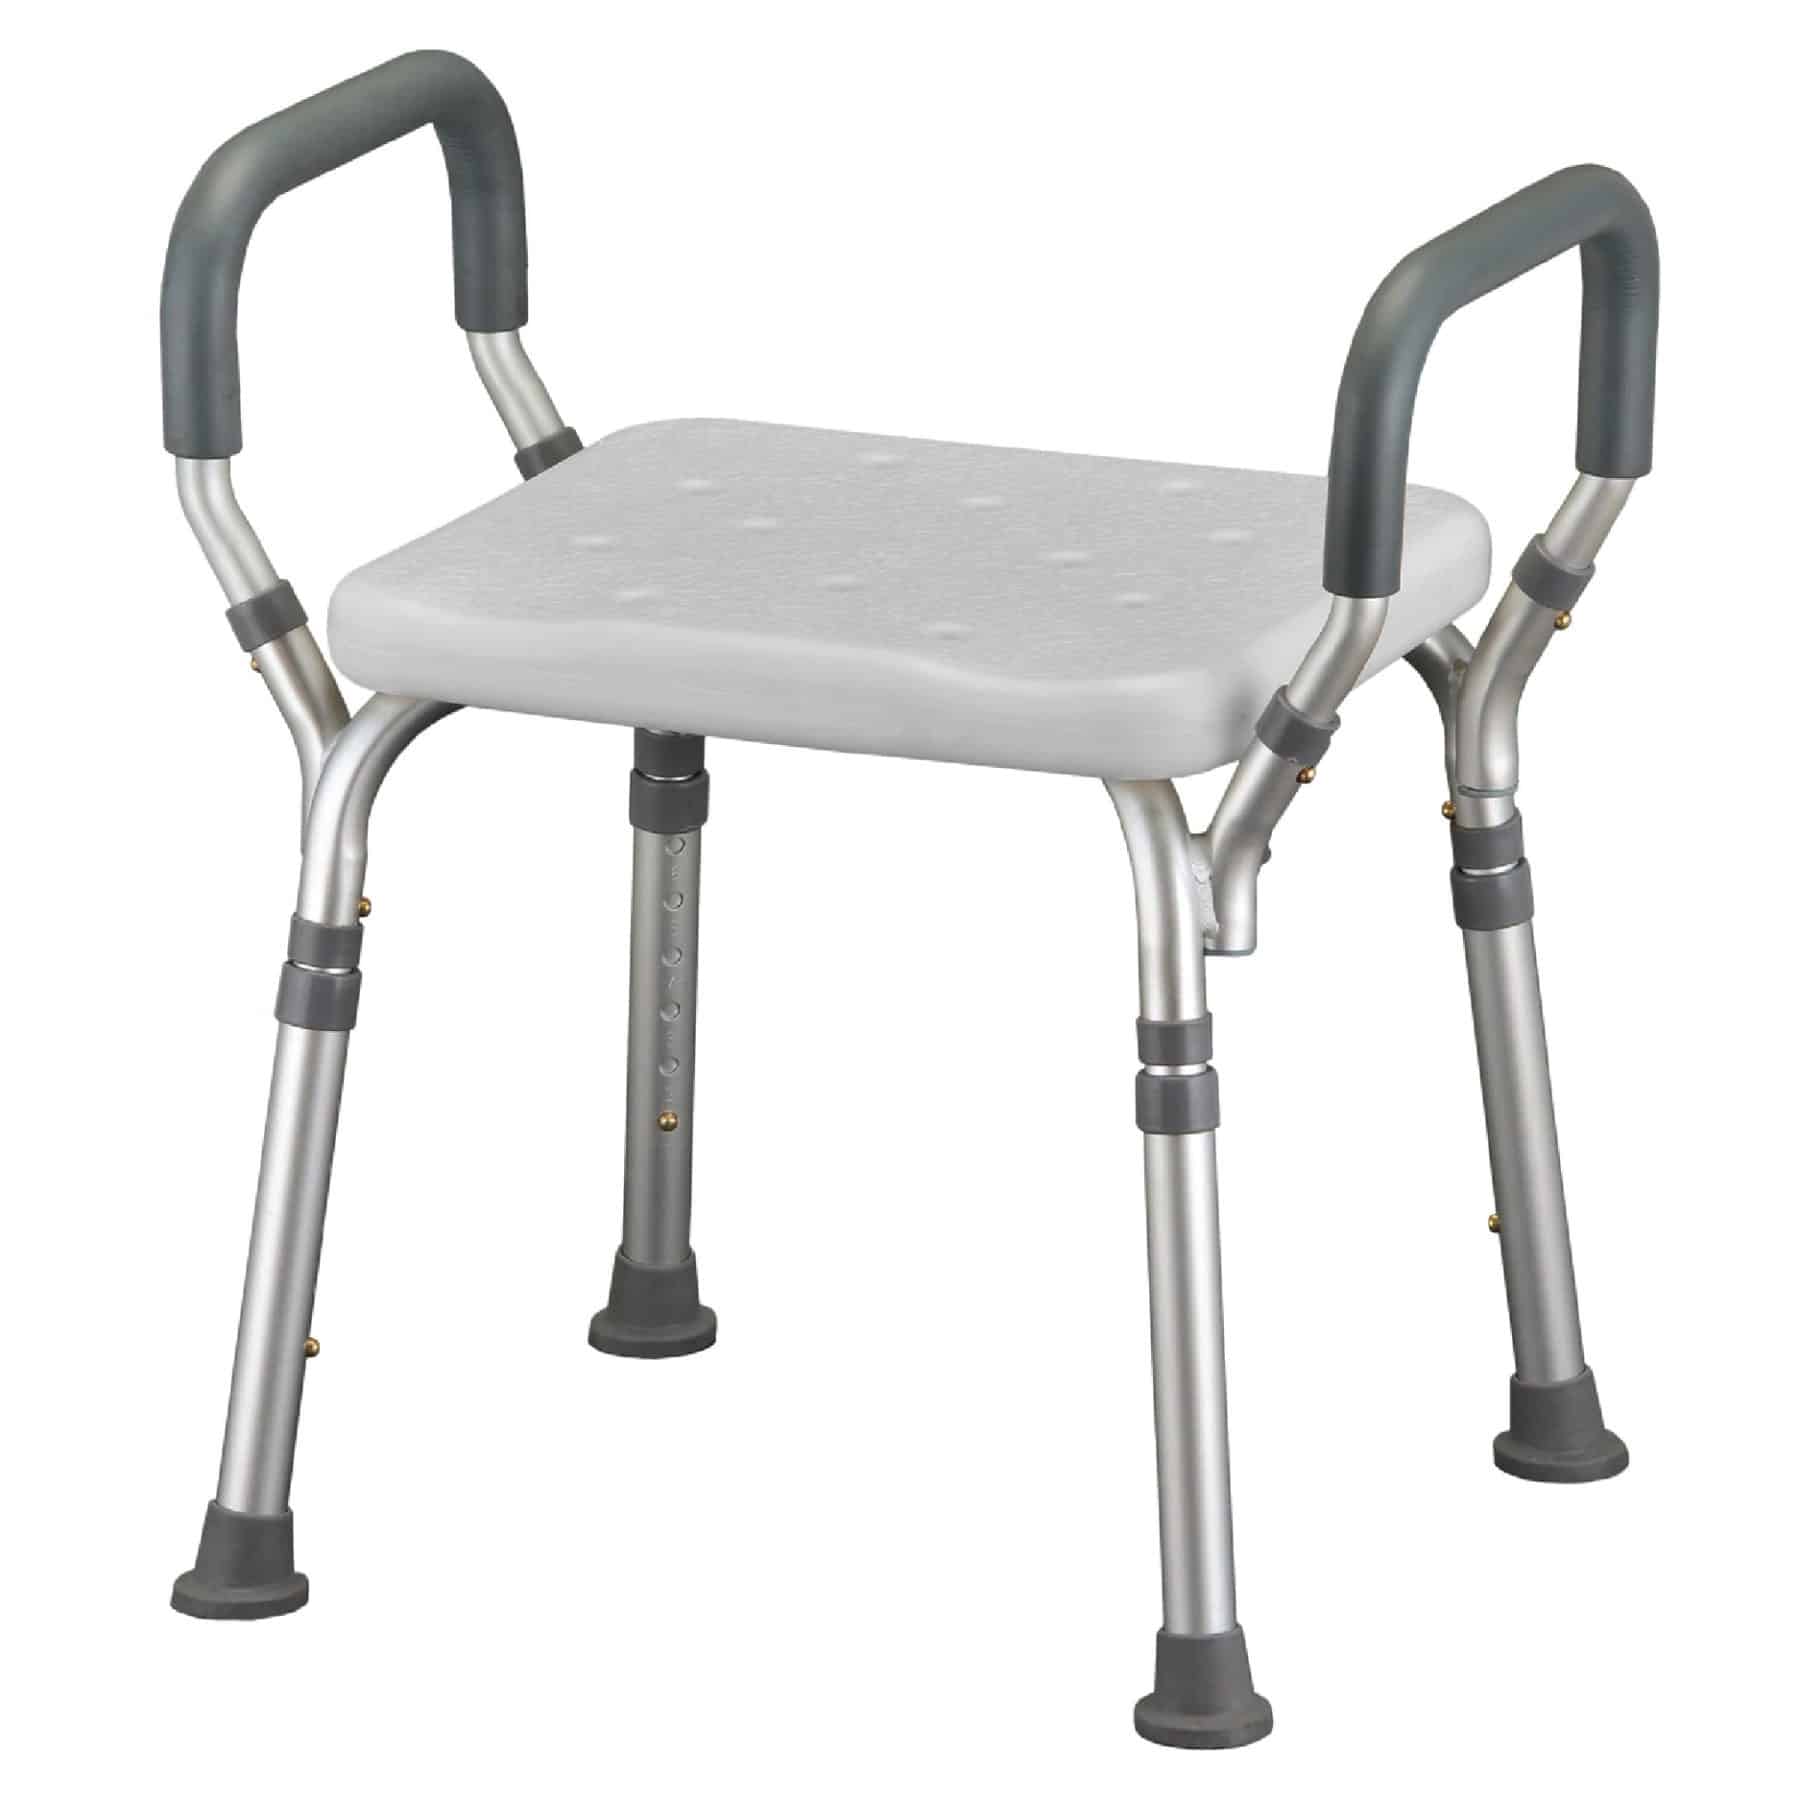 7_SHOWER CHAIR WITH ARMS-01